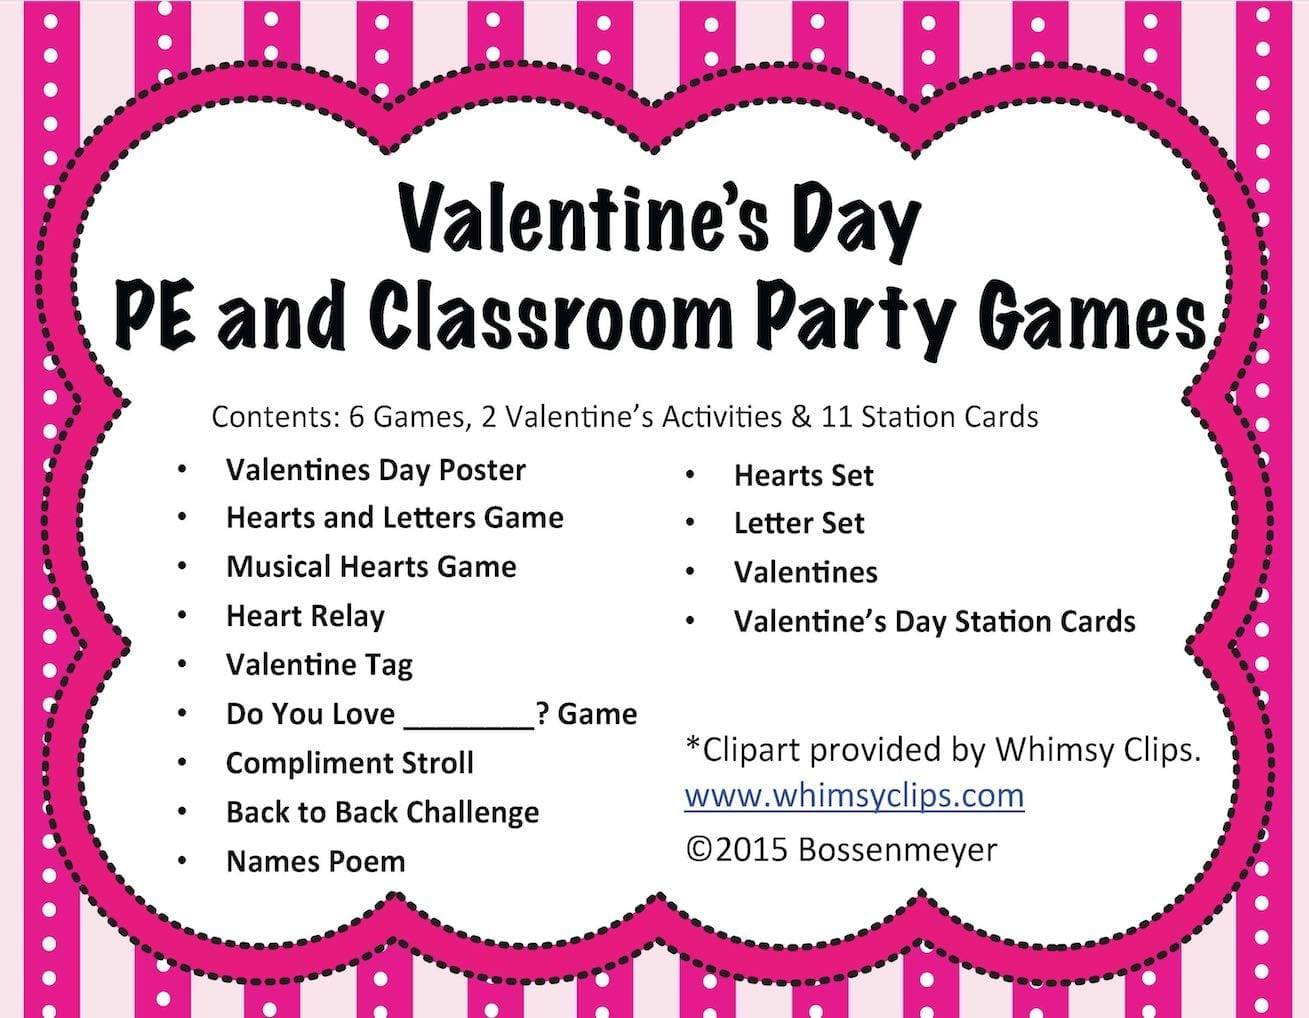 Valentines Day Party Games
 Valentine’s Day PE and Classroom Party Games Peaceful